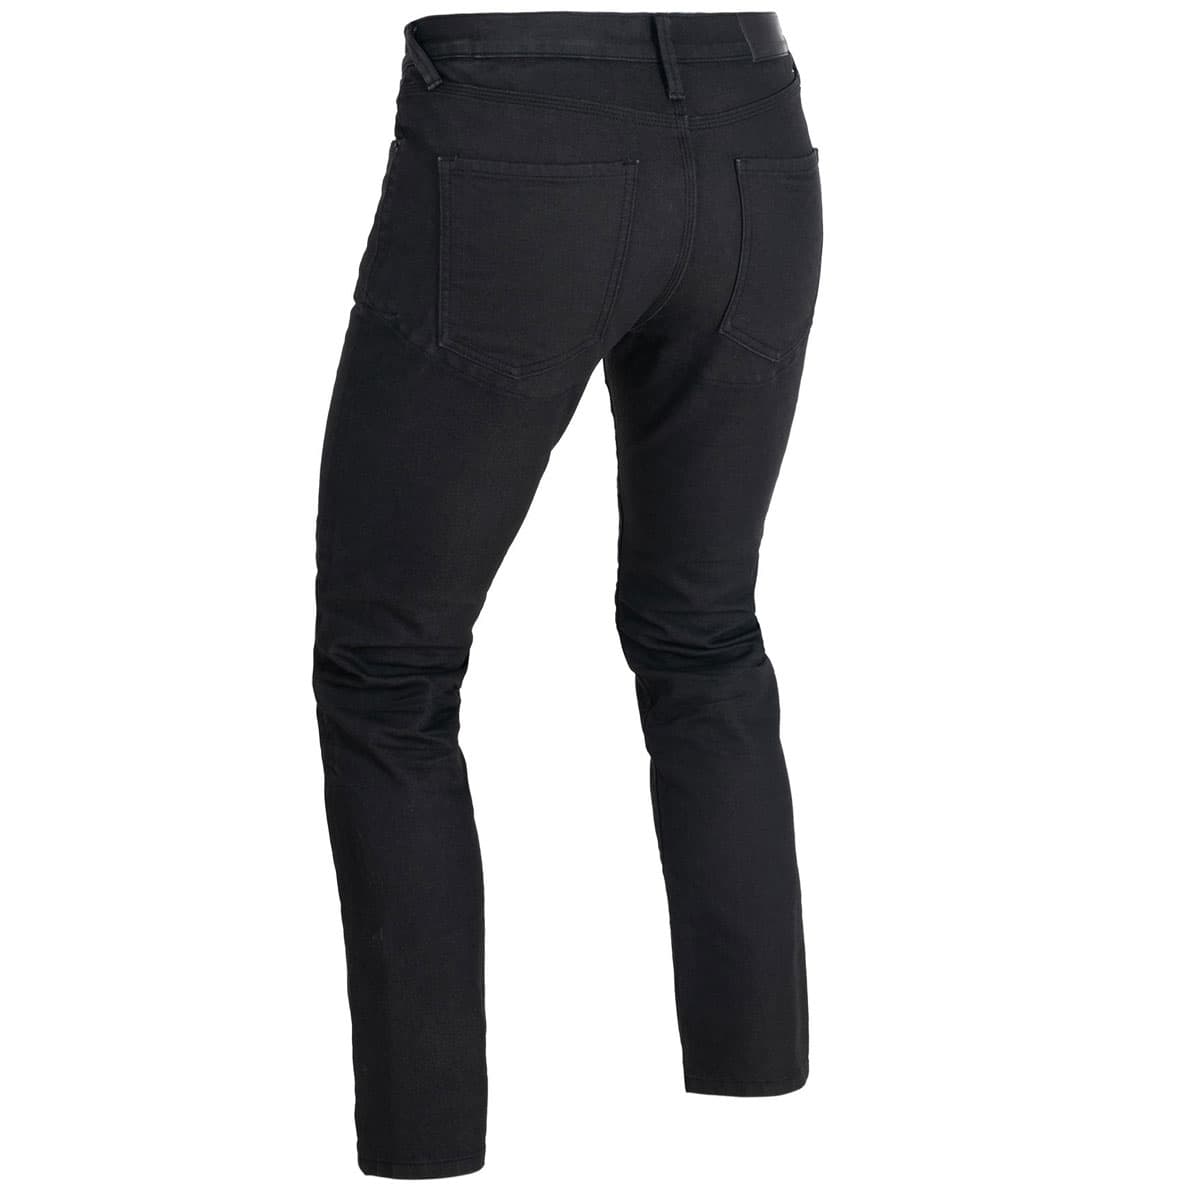 Oxford AAA Original Jeans in a straight fit: CE AAA rated single-layer motorcycle jeans - back